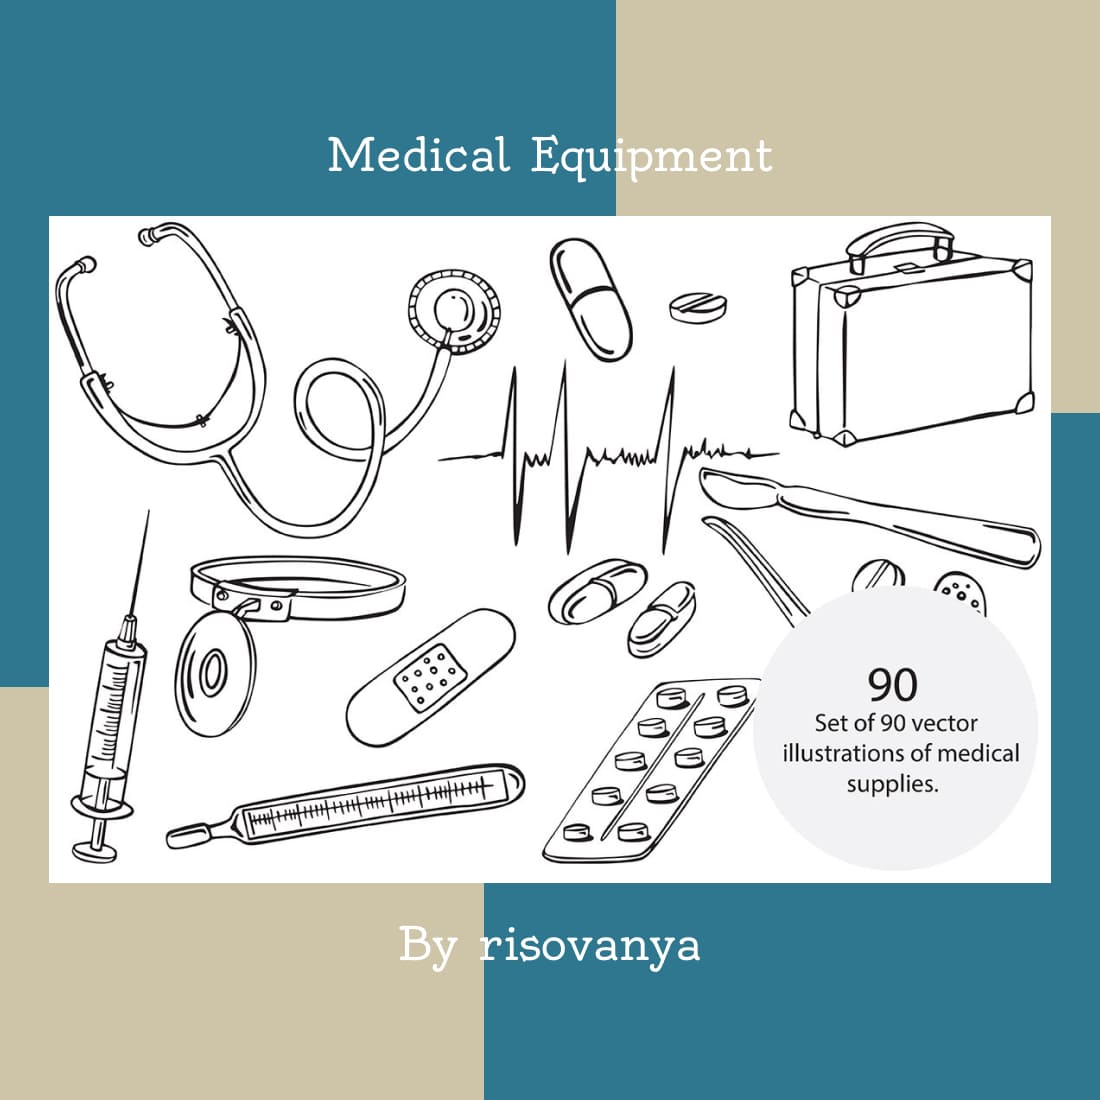 medical equipment cover image.